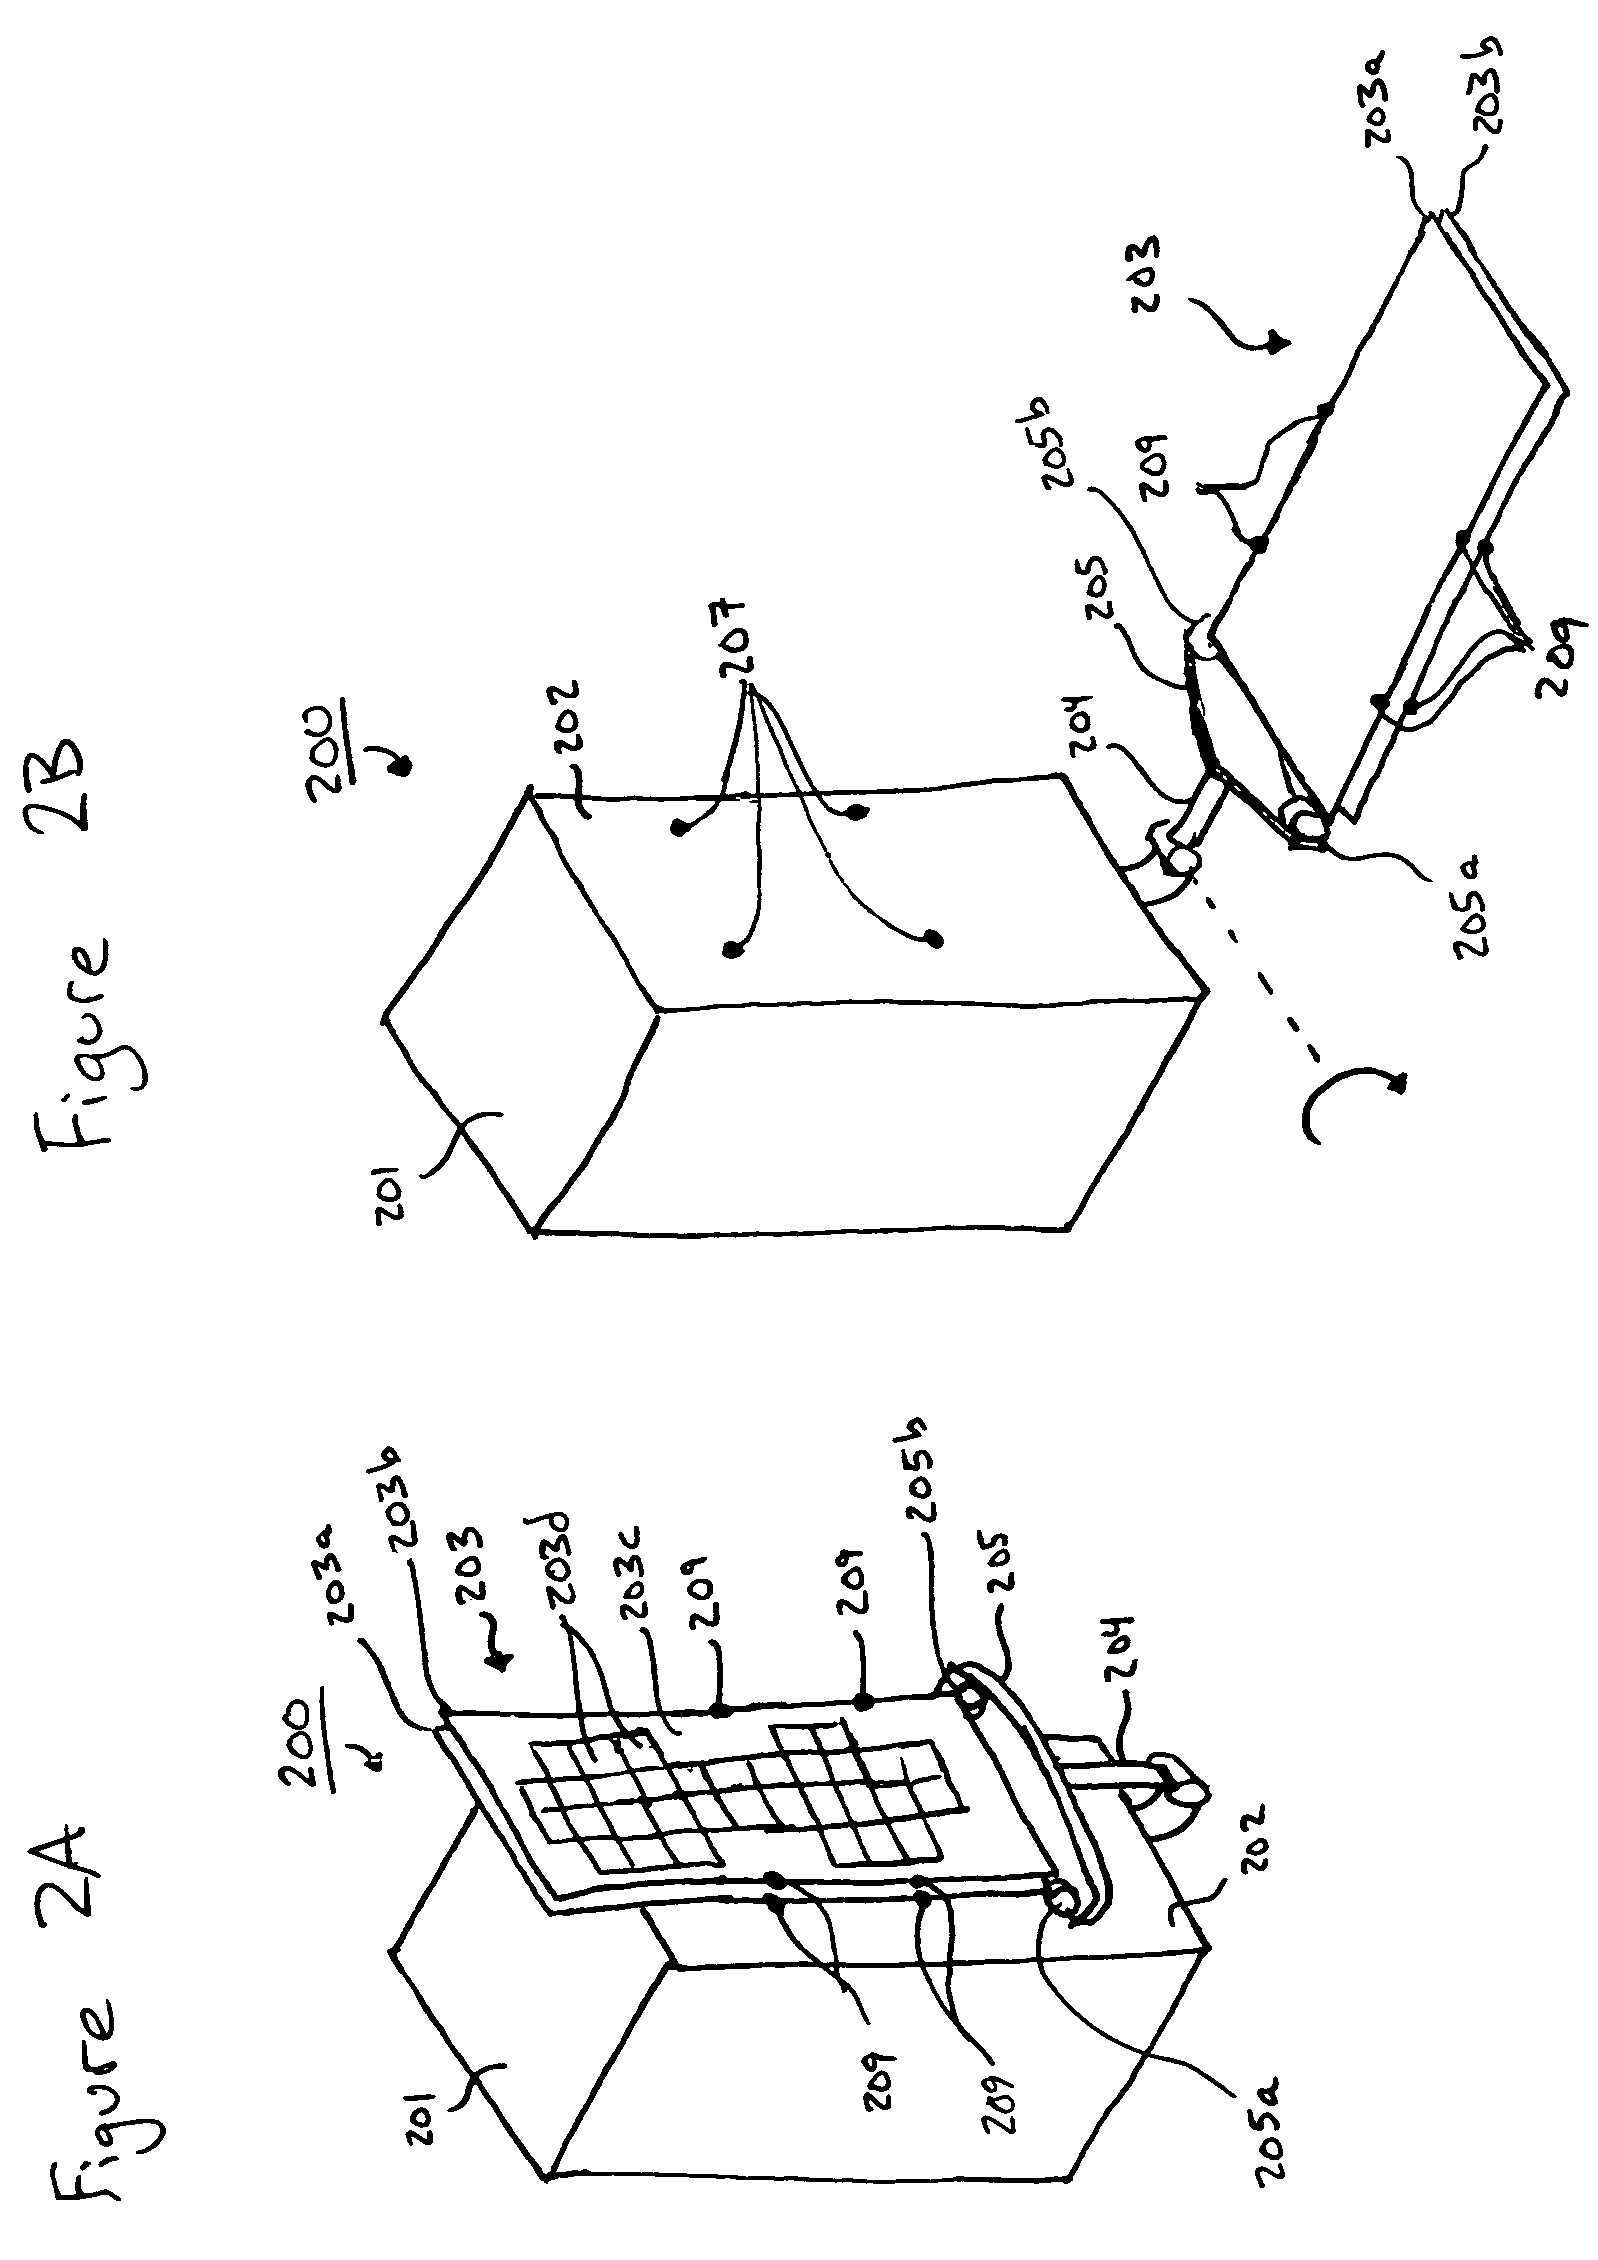 System of stowing and deploying multiple phased arrays or combinations of arrays and reflectors